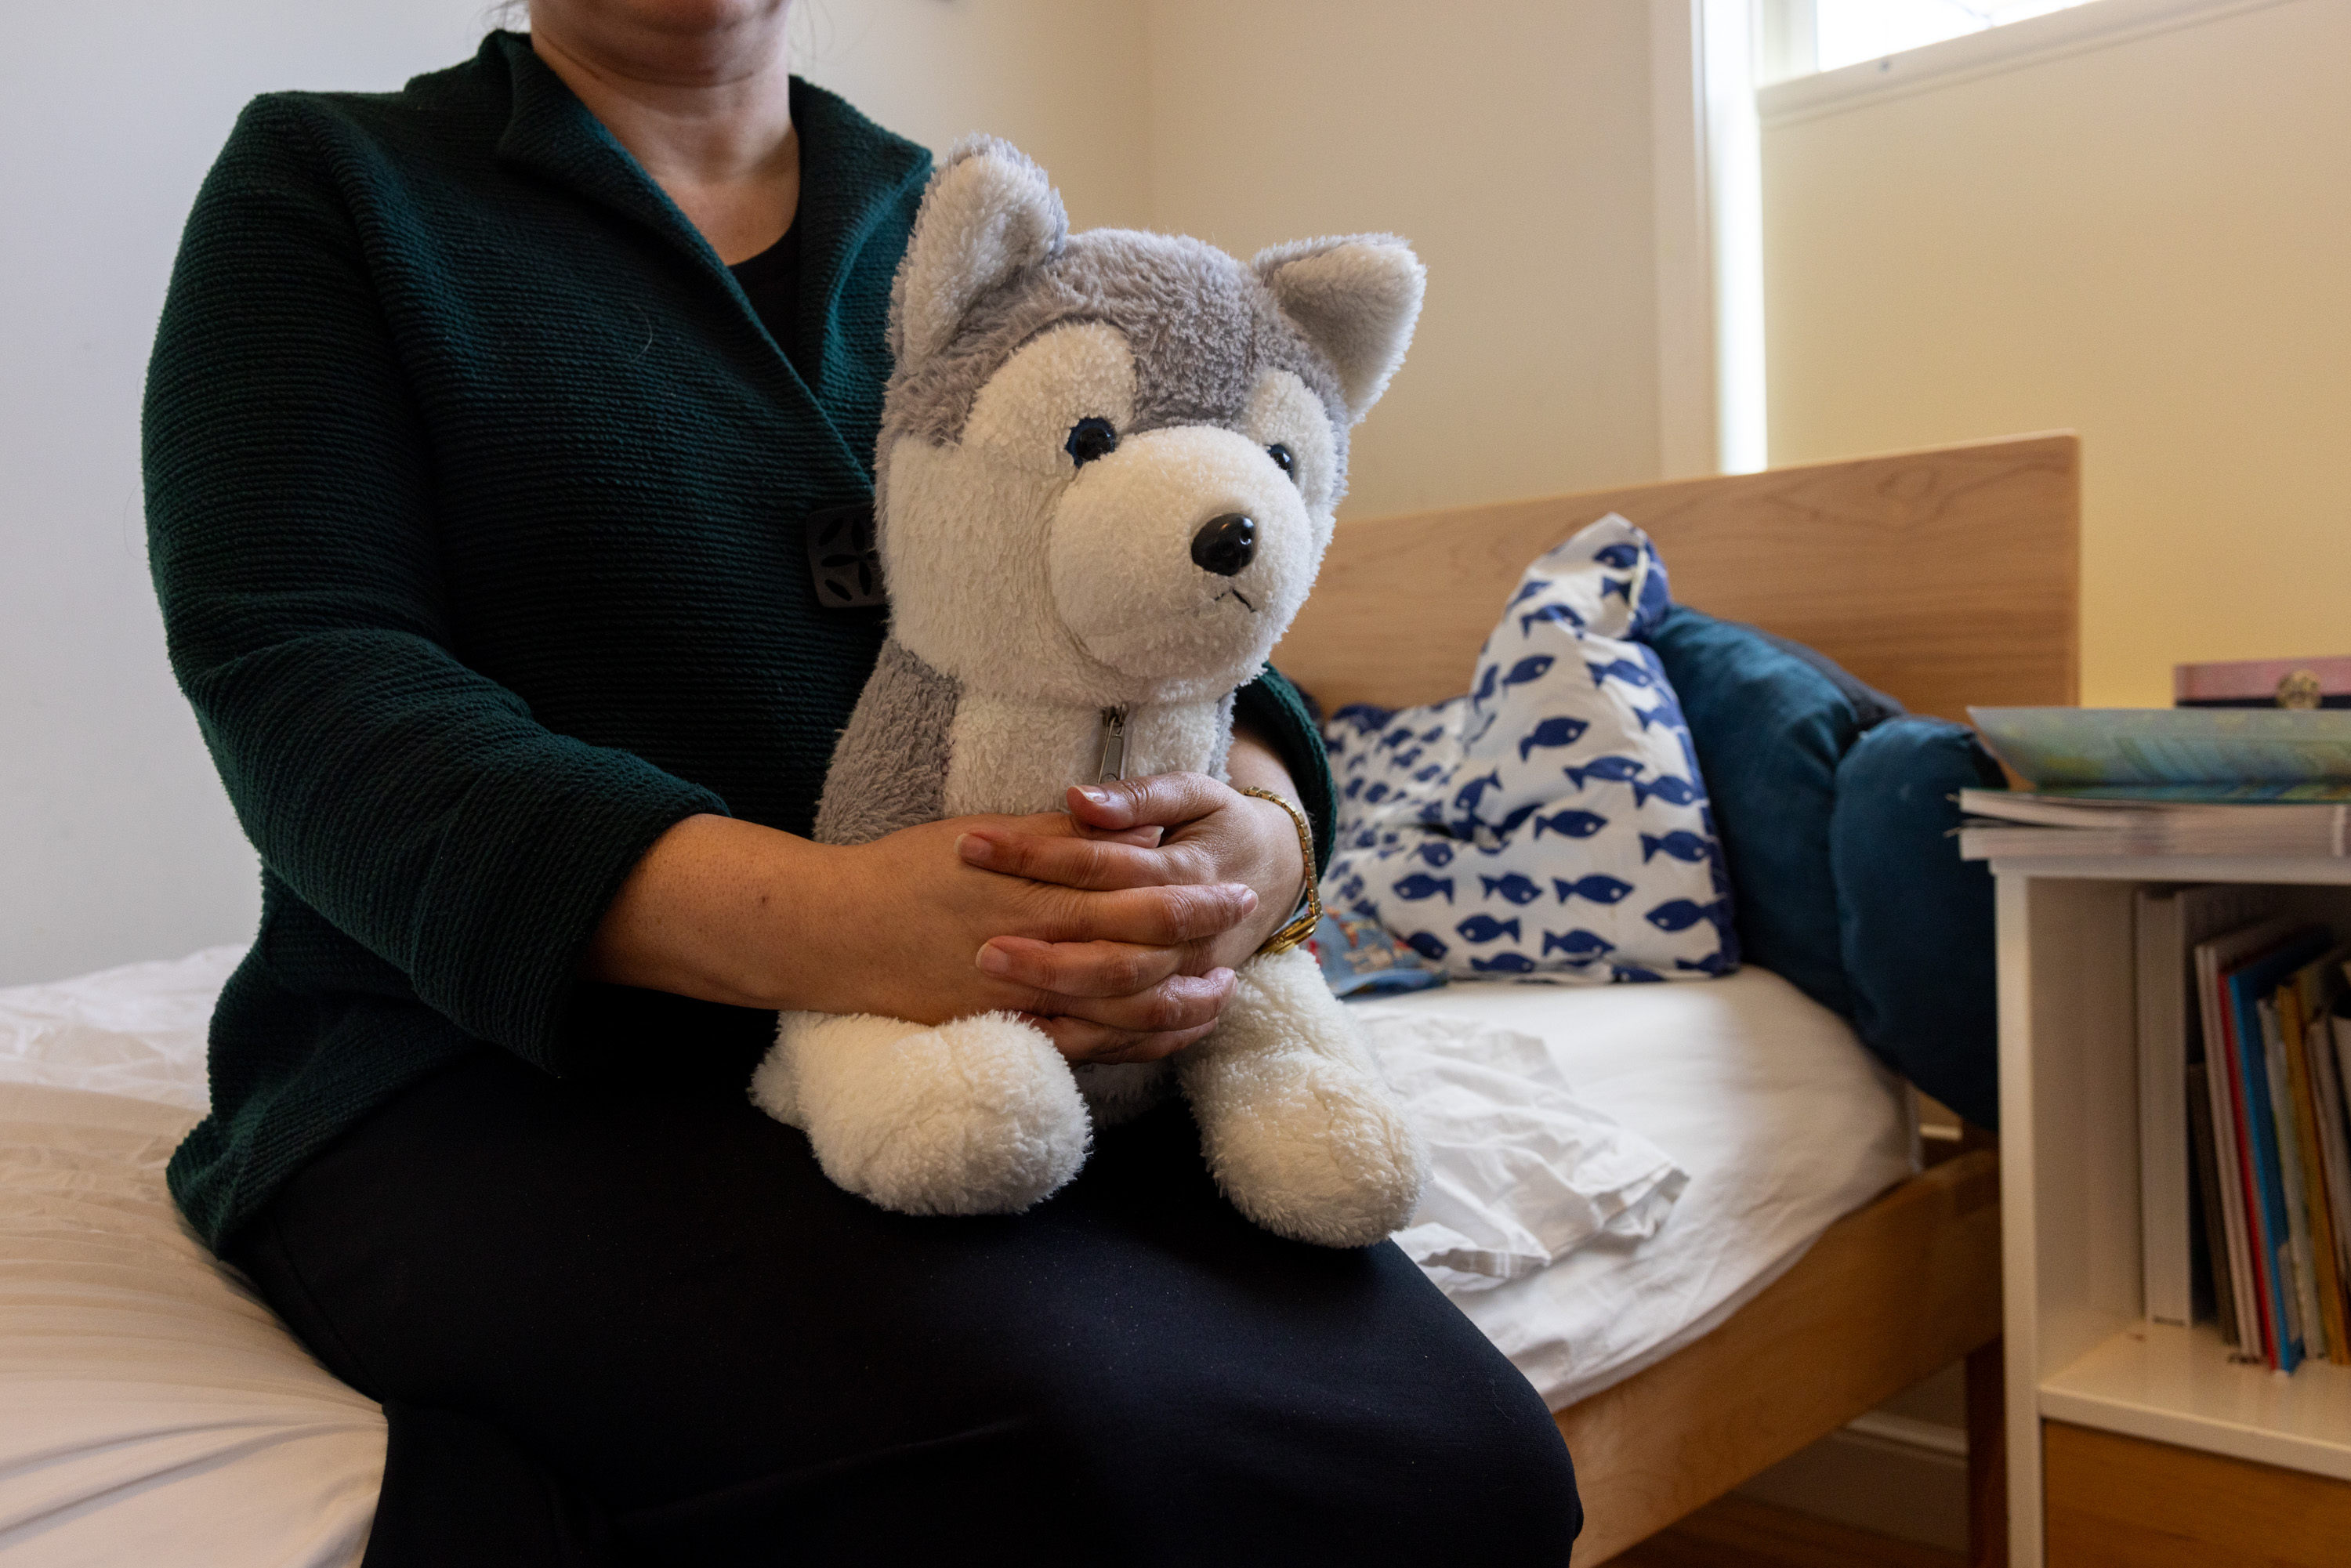 A person is seated holding a plush wolf toy, with a bed and pillow in the background.